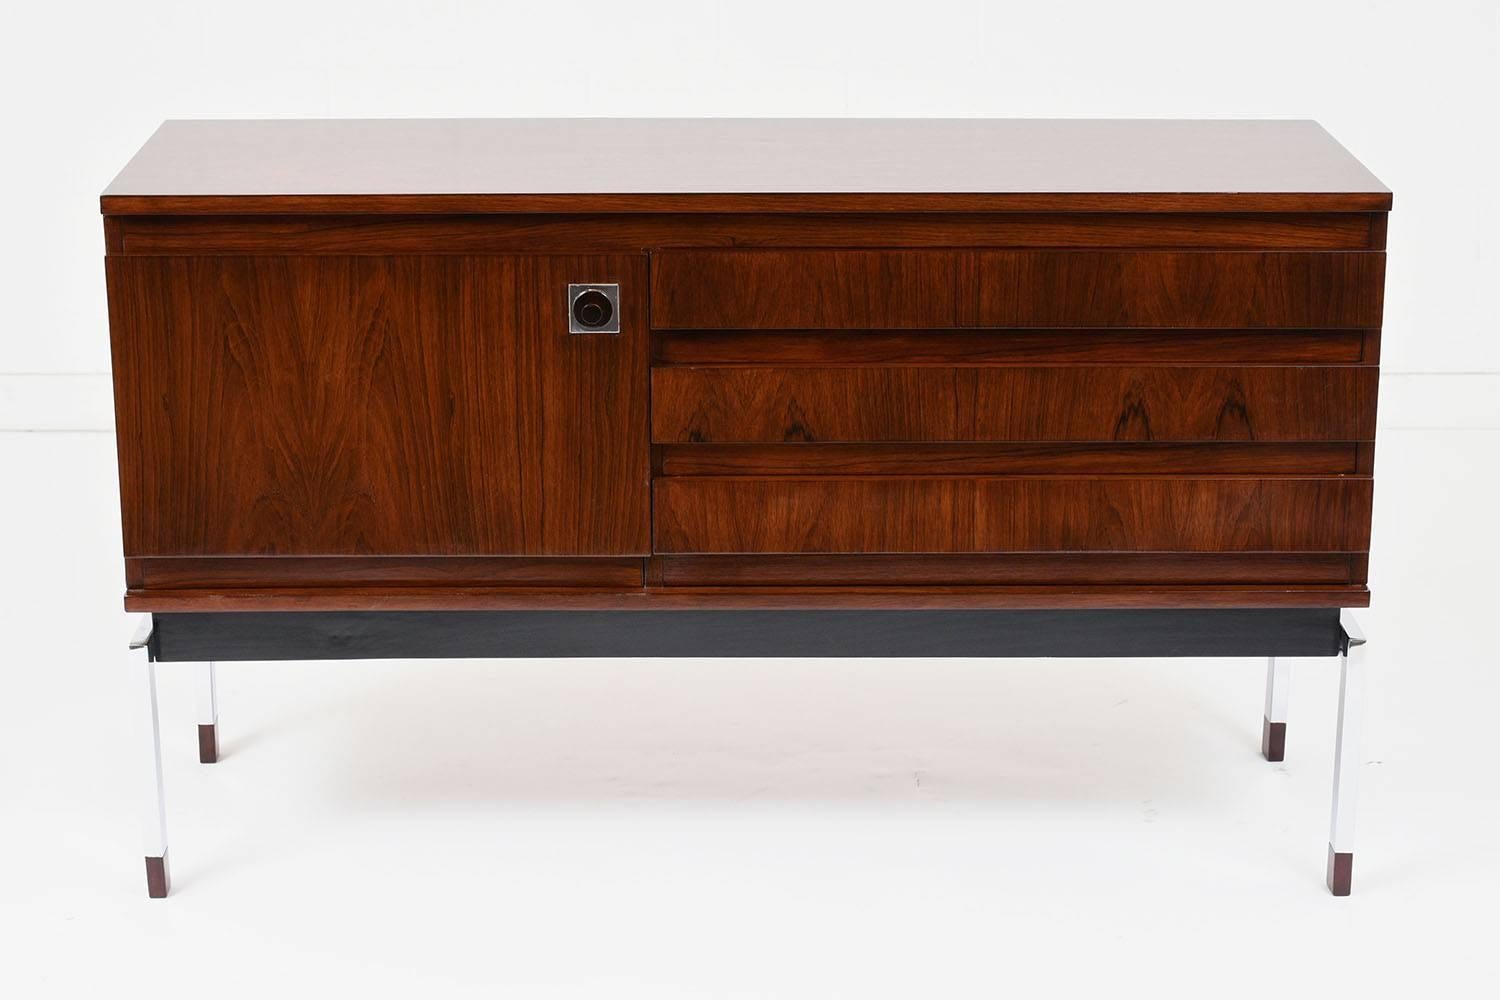 This 1960s Mid-Century Modern style credenza is made of rosewood stained in a rich rosewood color with a polished finish. The credenza has three drawers with carved finger pulls on the right and a cabinet with a knob pull on the left. Inside the